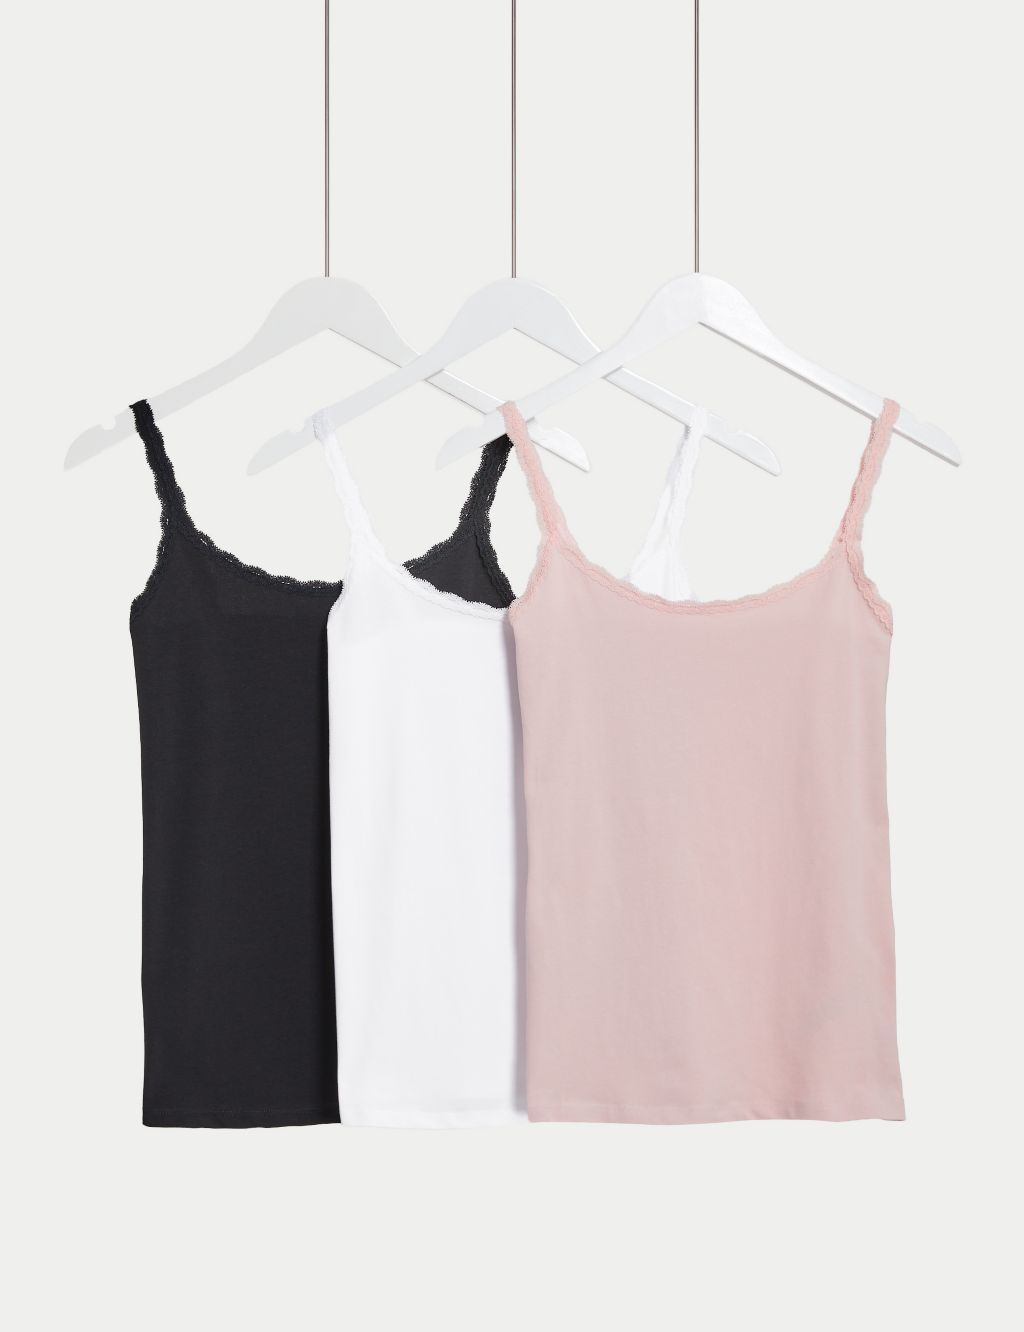 Cami Tops, Strappy Tops